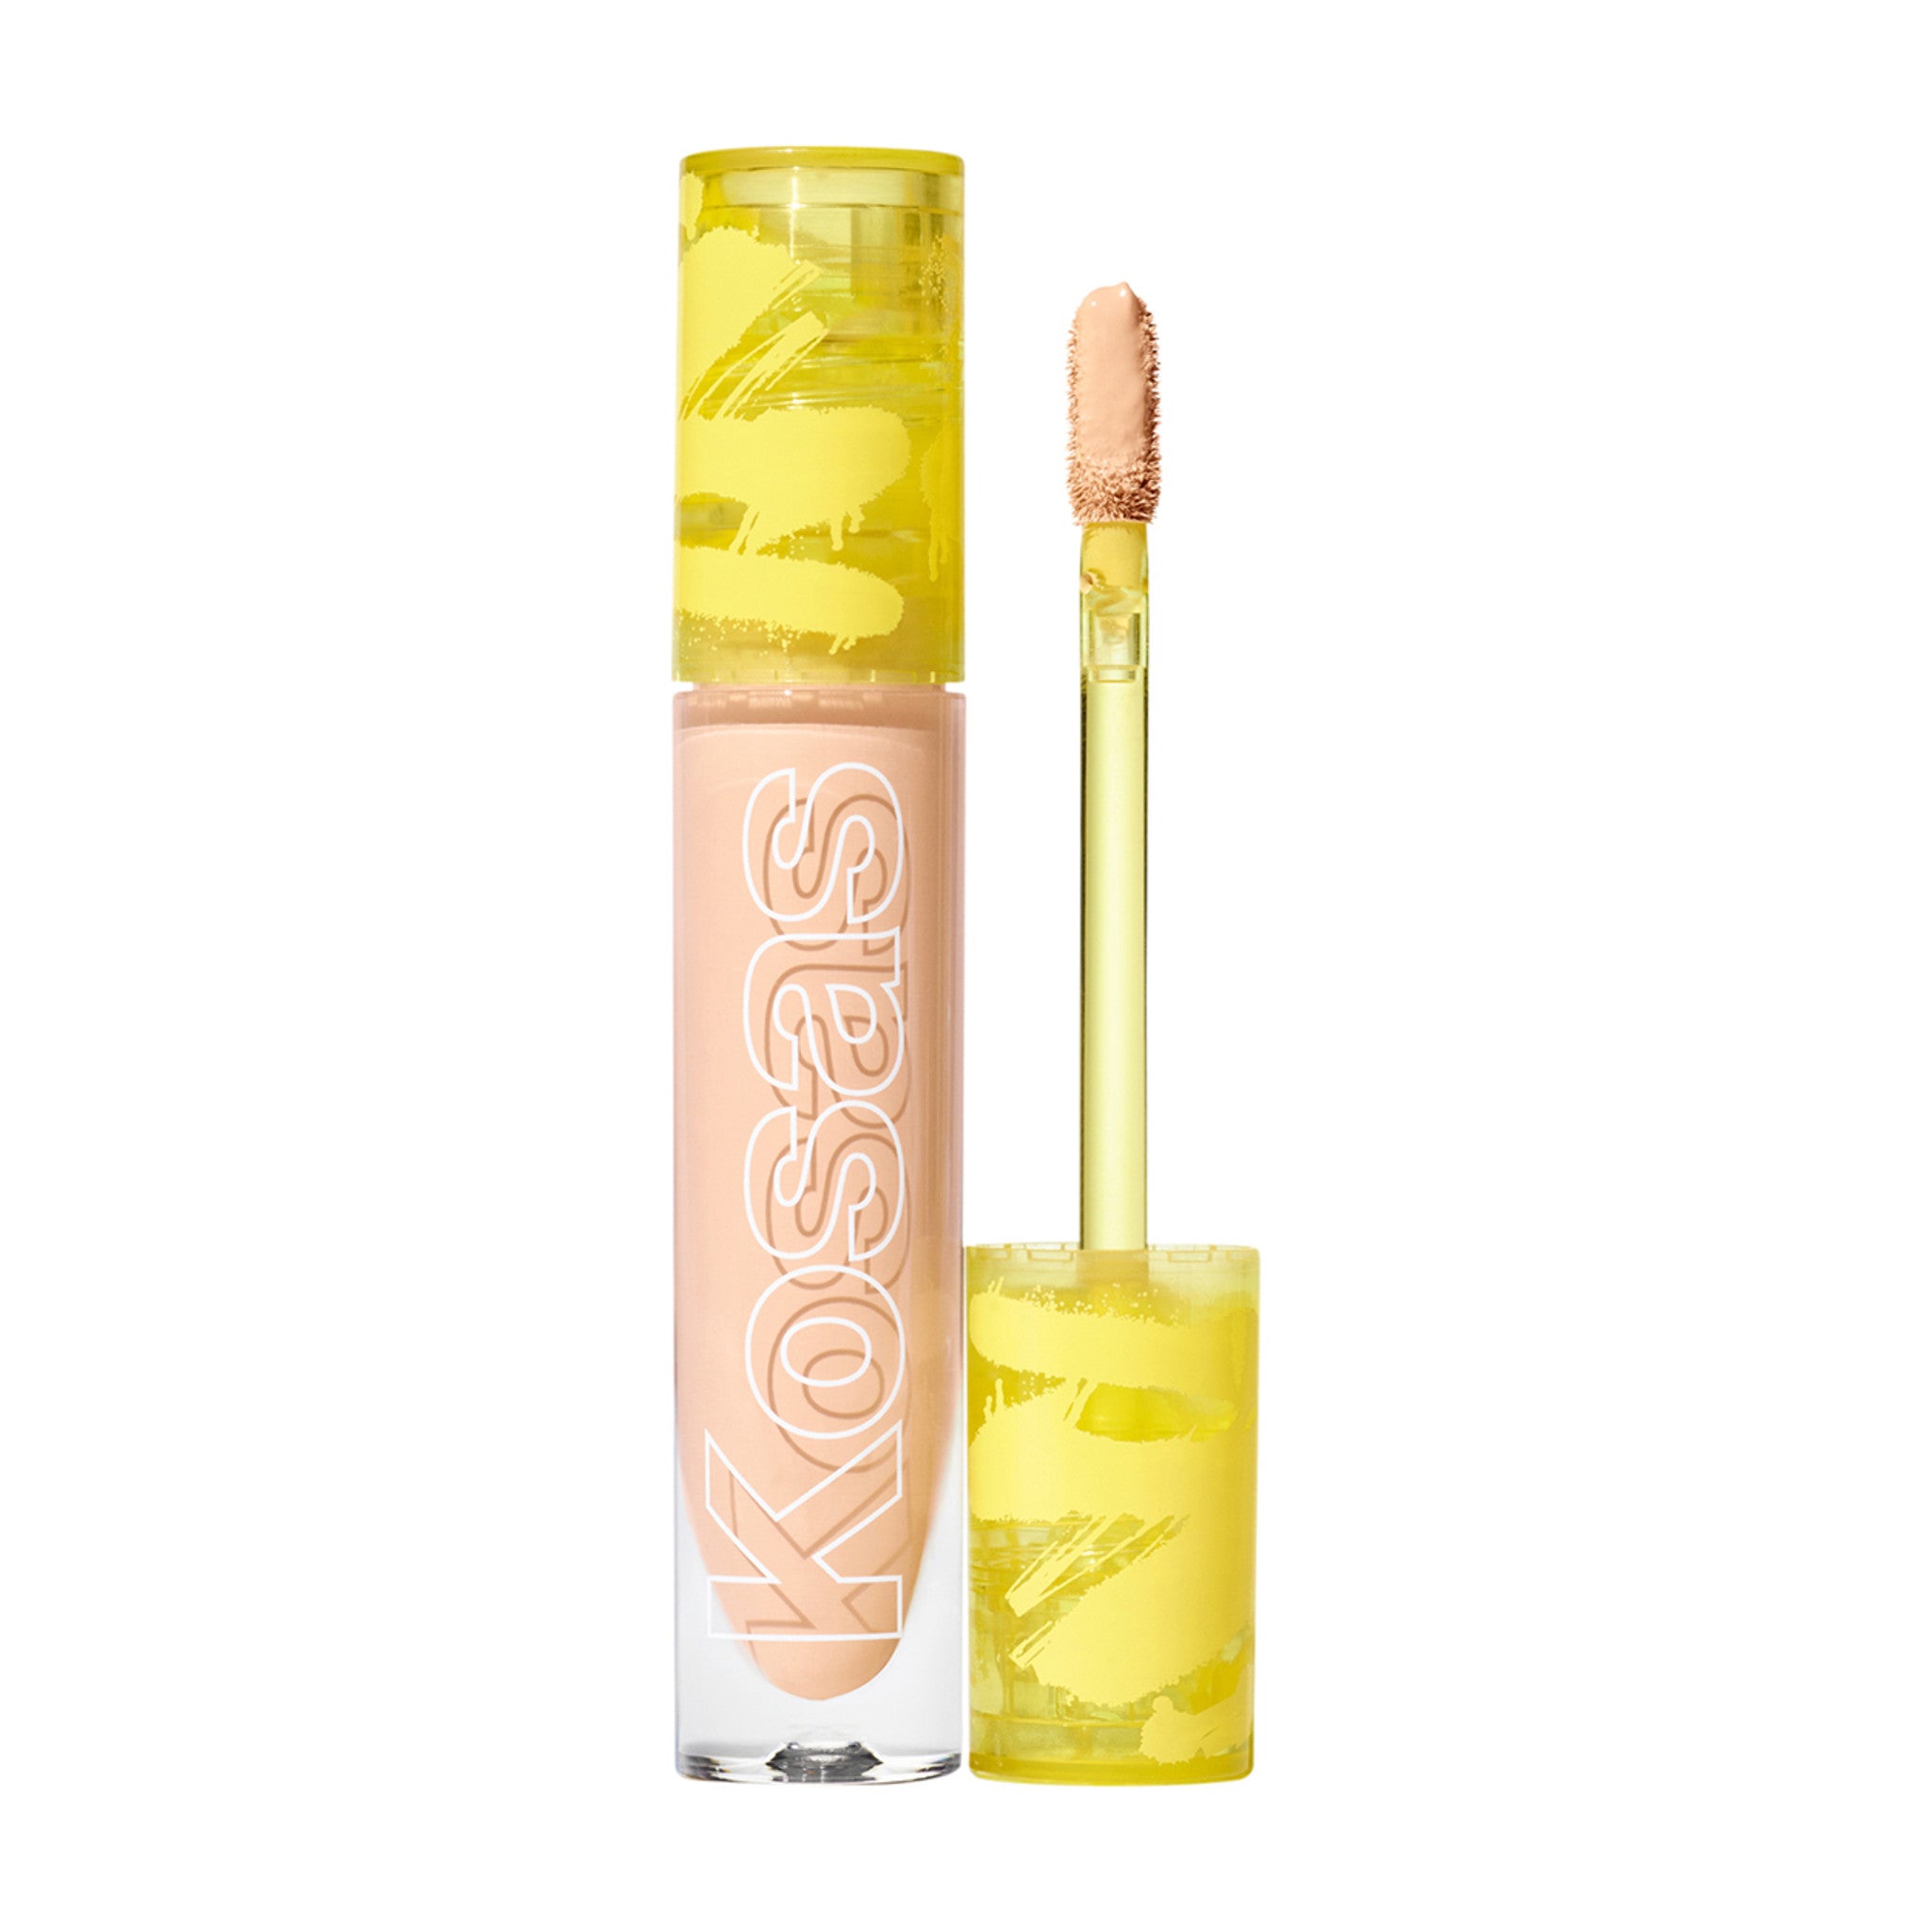 Kosas Revealer Concealer Color/Shade variant: Tone 4.5 N main image. This product is for medium cool neutral pink complexions